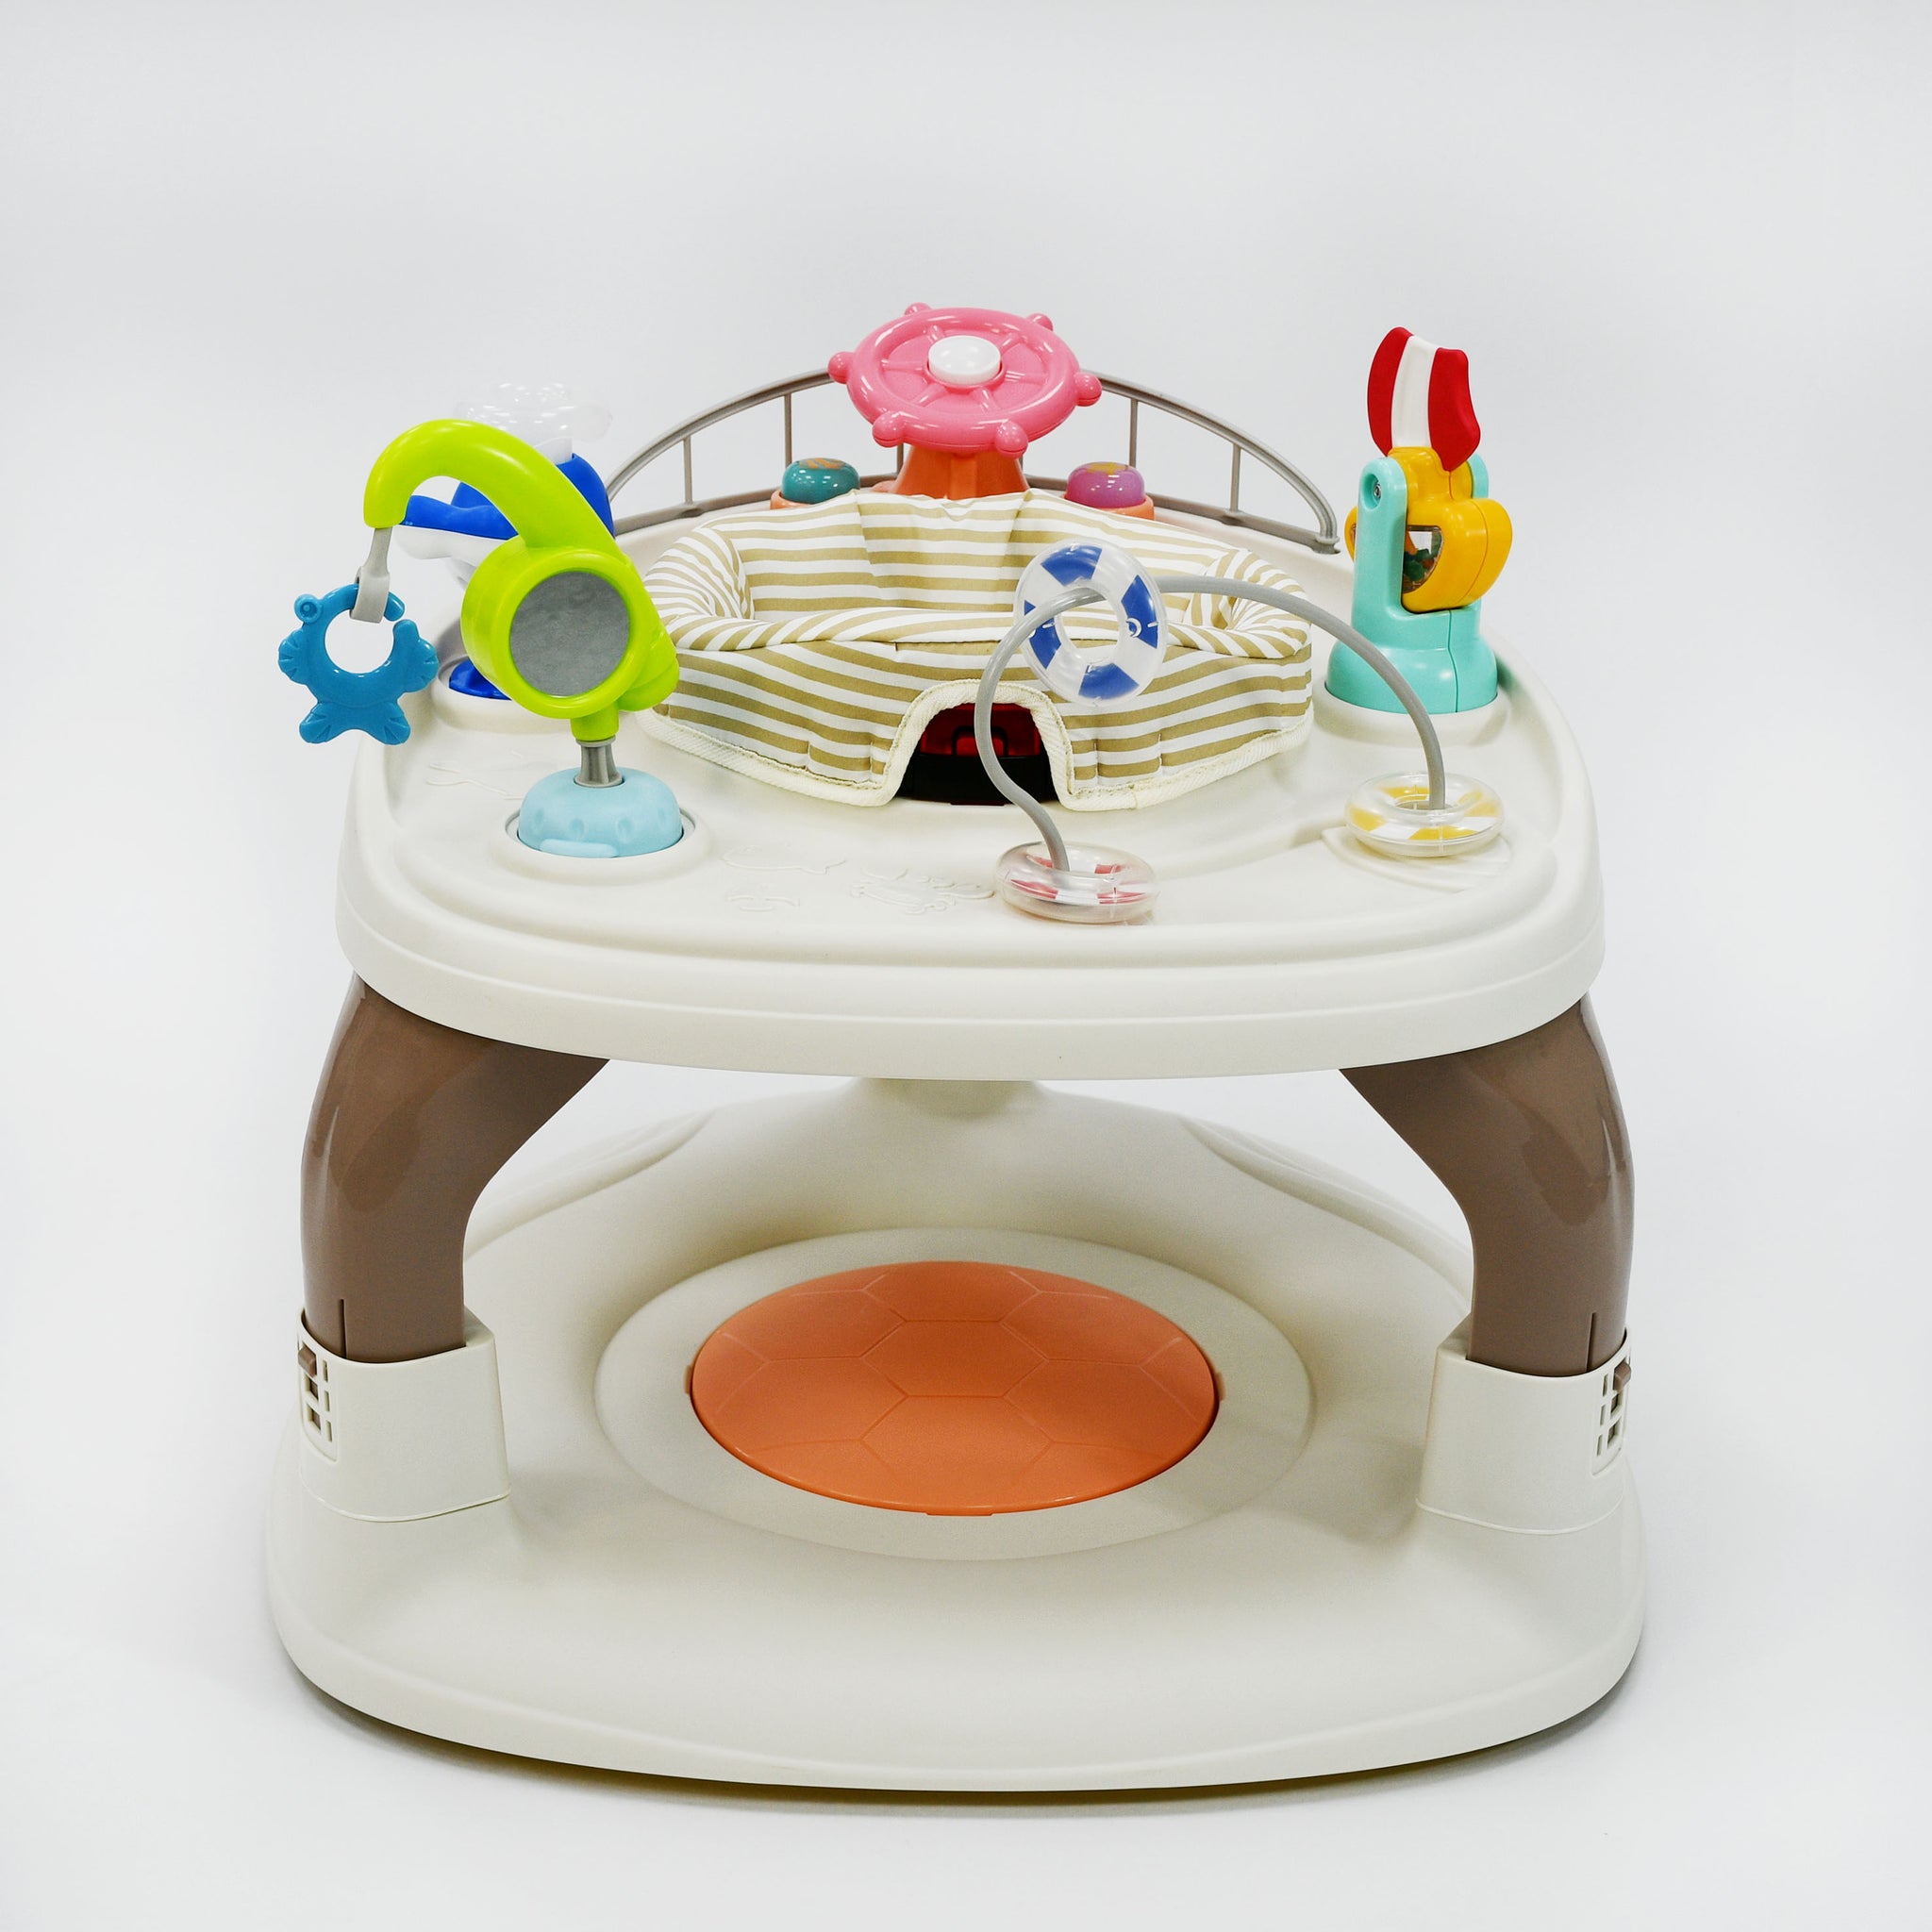 dessert sand activity center with toys in tray